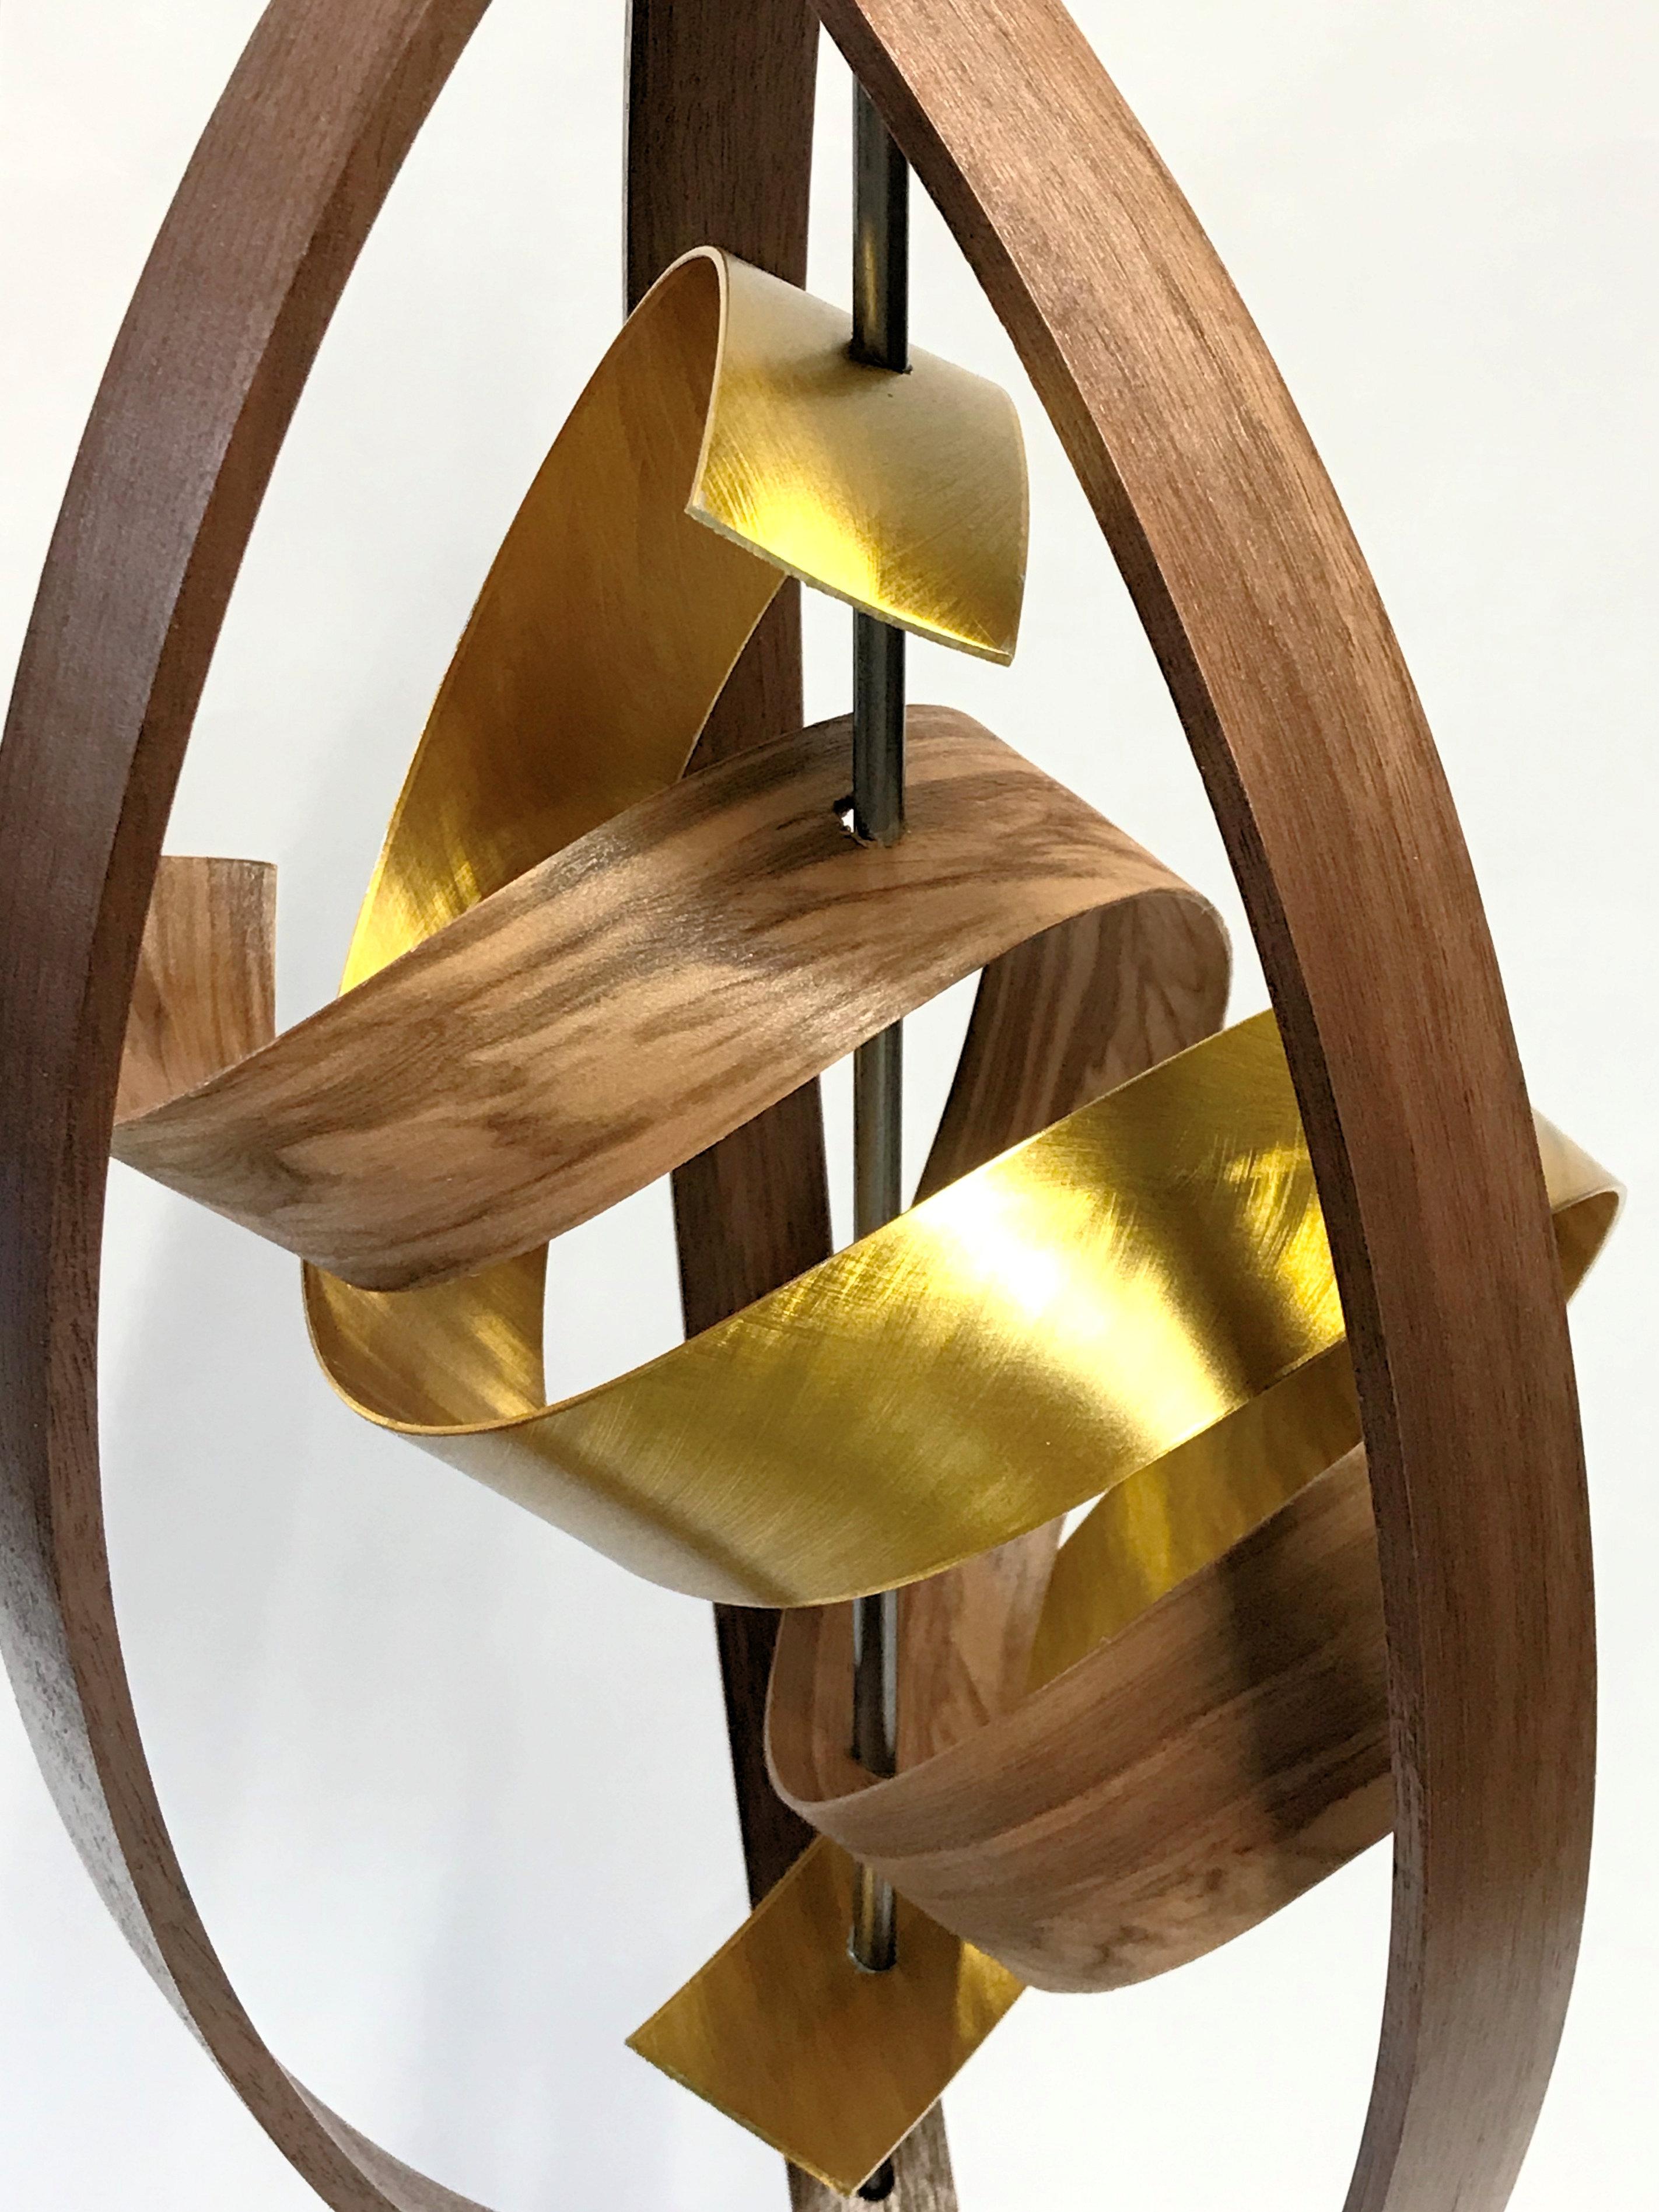 Description:  This sculpture top consist of formed and braided black walnut & red gum wood slats, accented with ground, gold-tinted aluminum slat and extends from a solid black walnut base.  Approx. 28”overall height, 8”x 9” spread. 
Title: